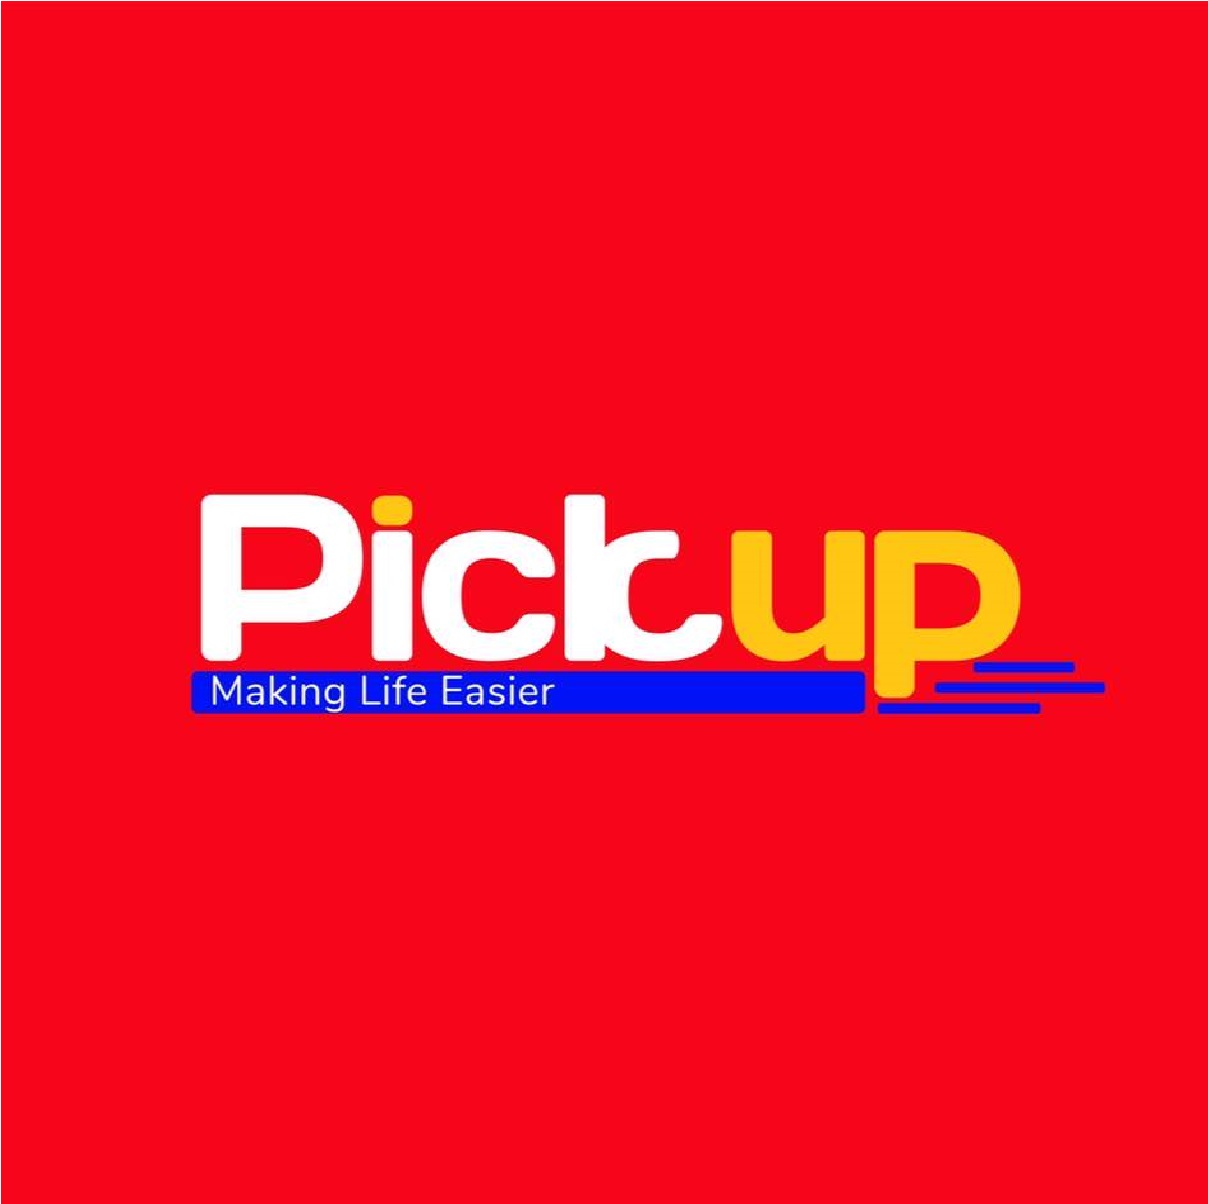 Pick Up convenience stores